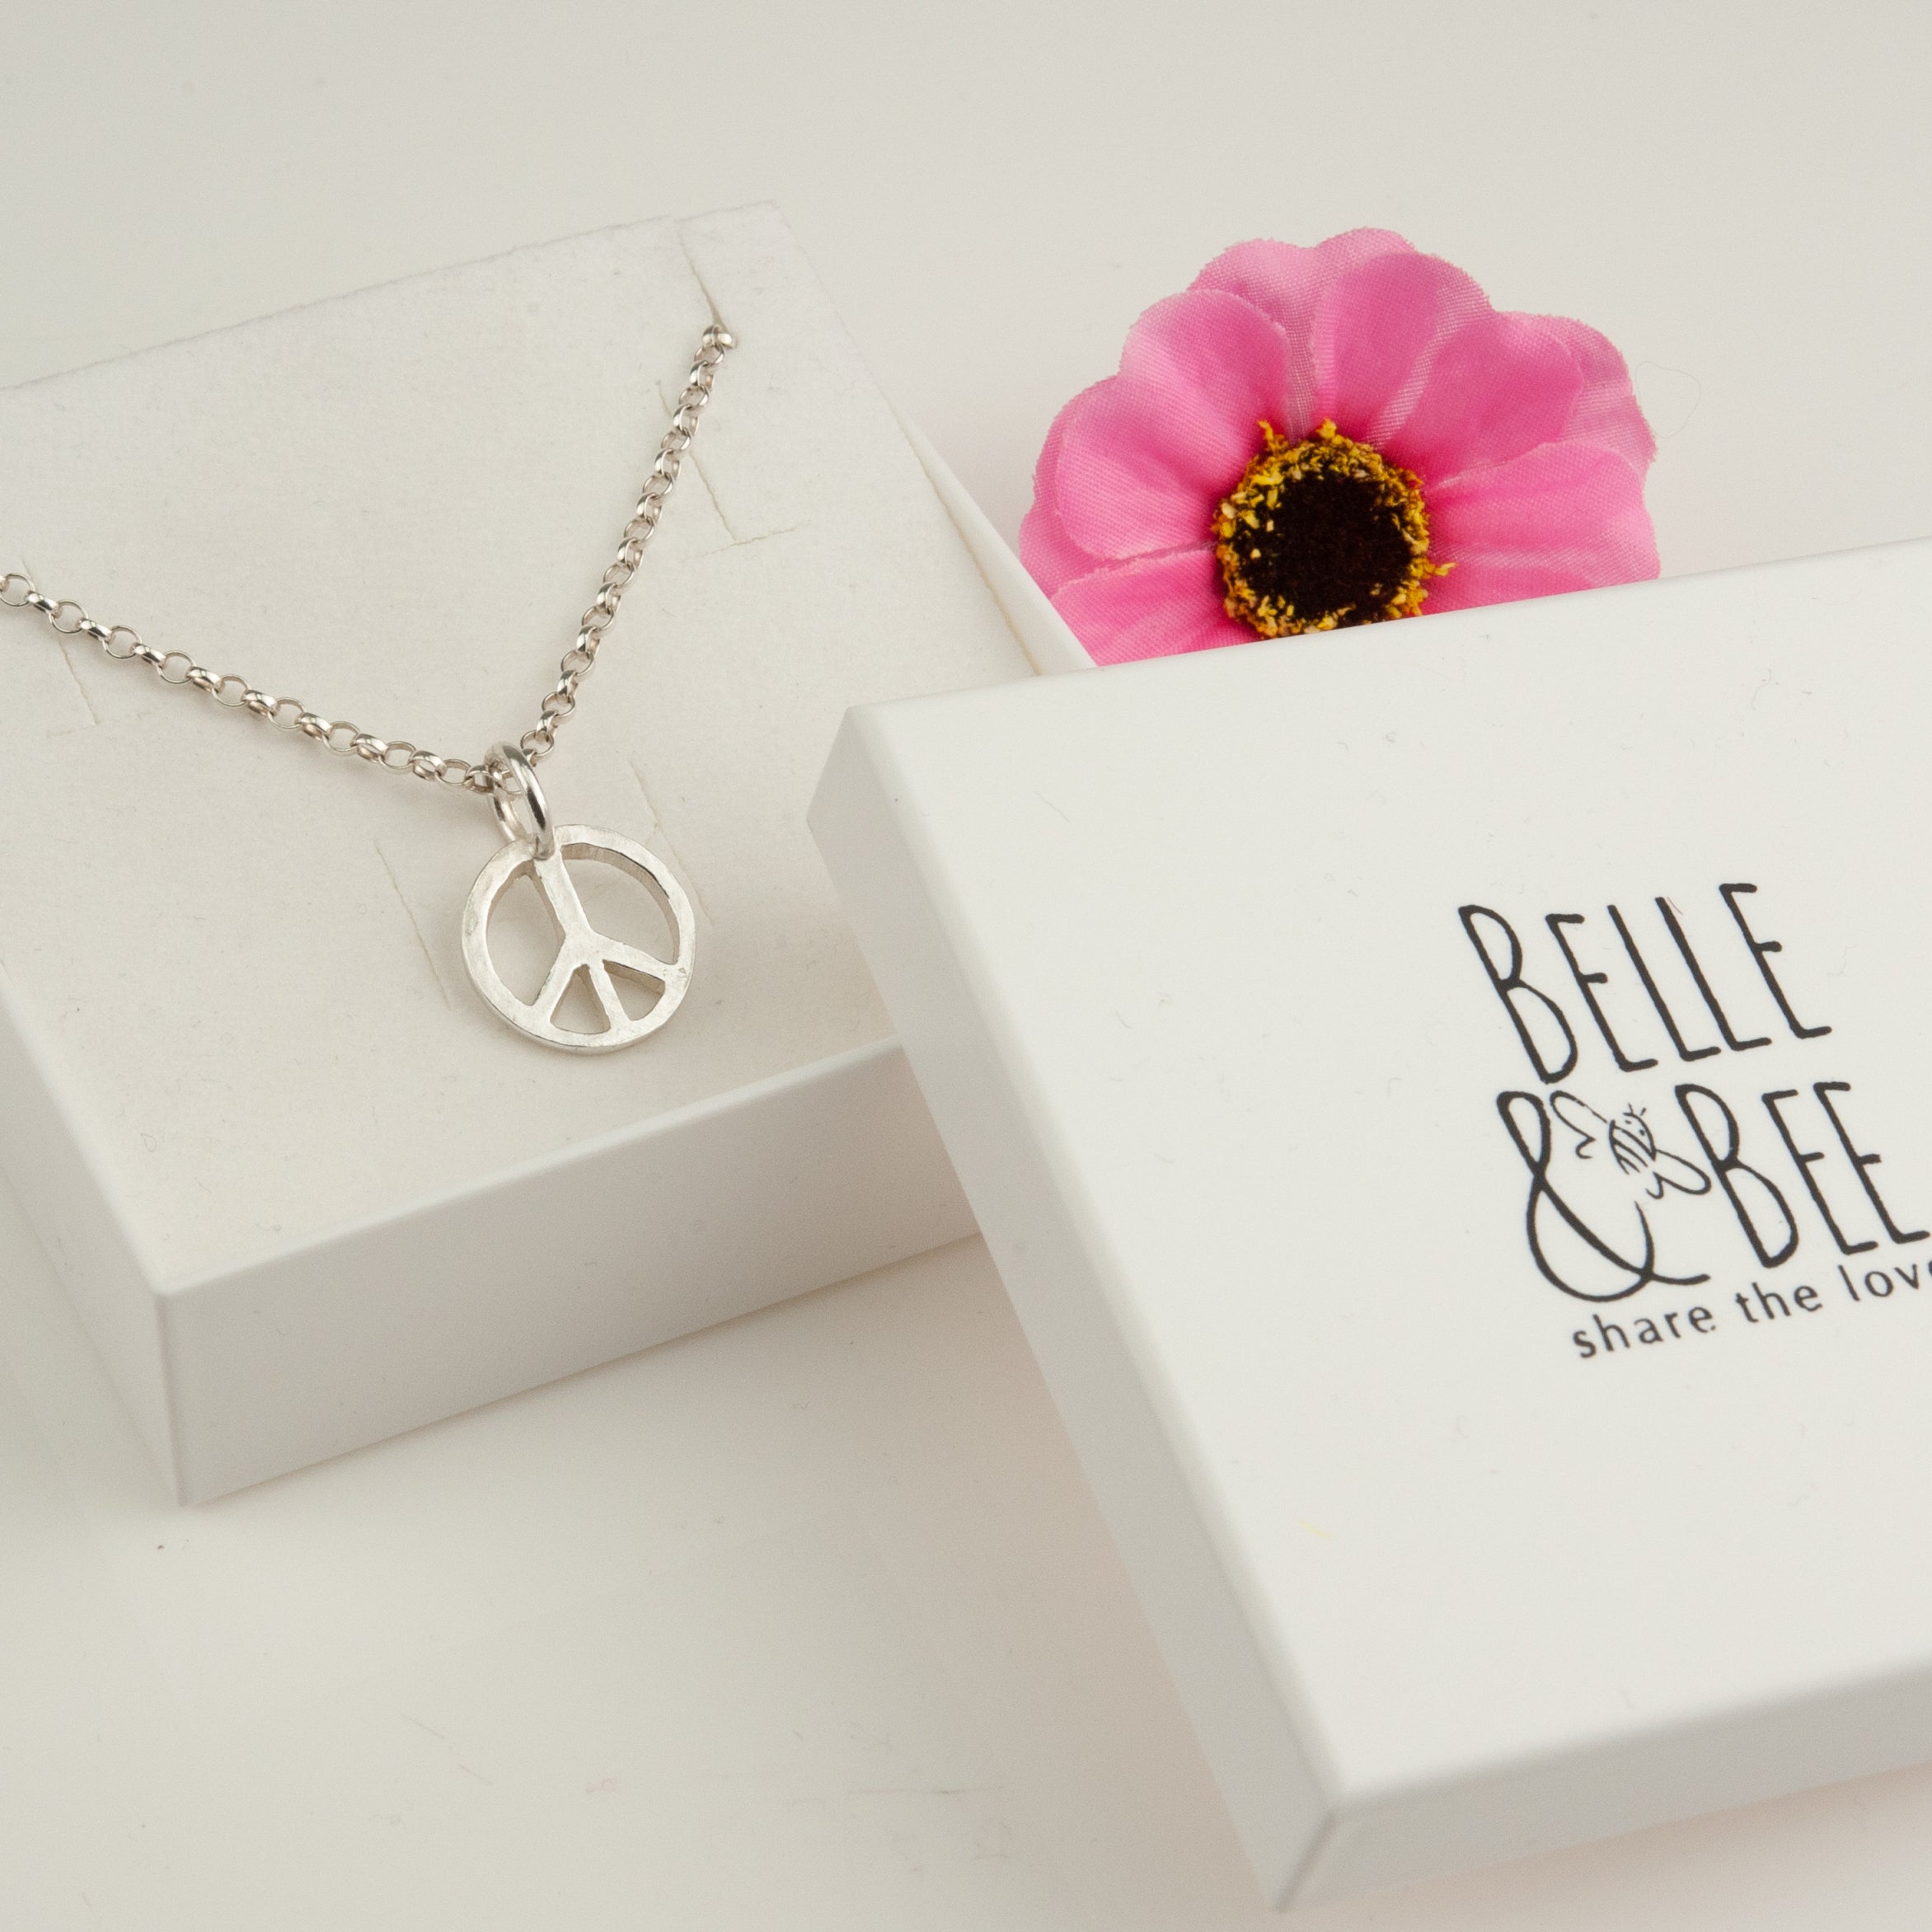 Belle & Bee sterling silver peace sign necklace